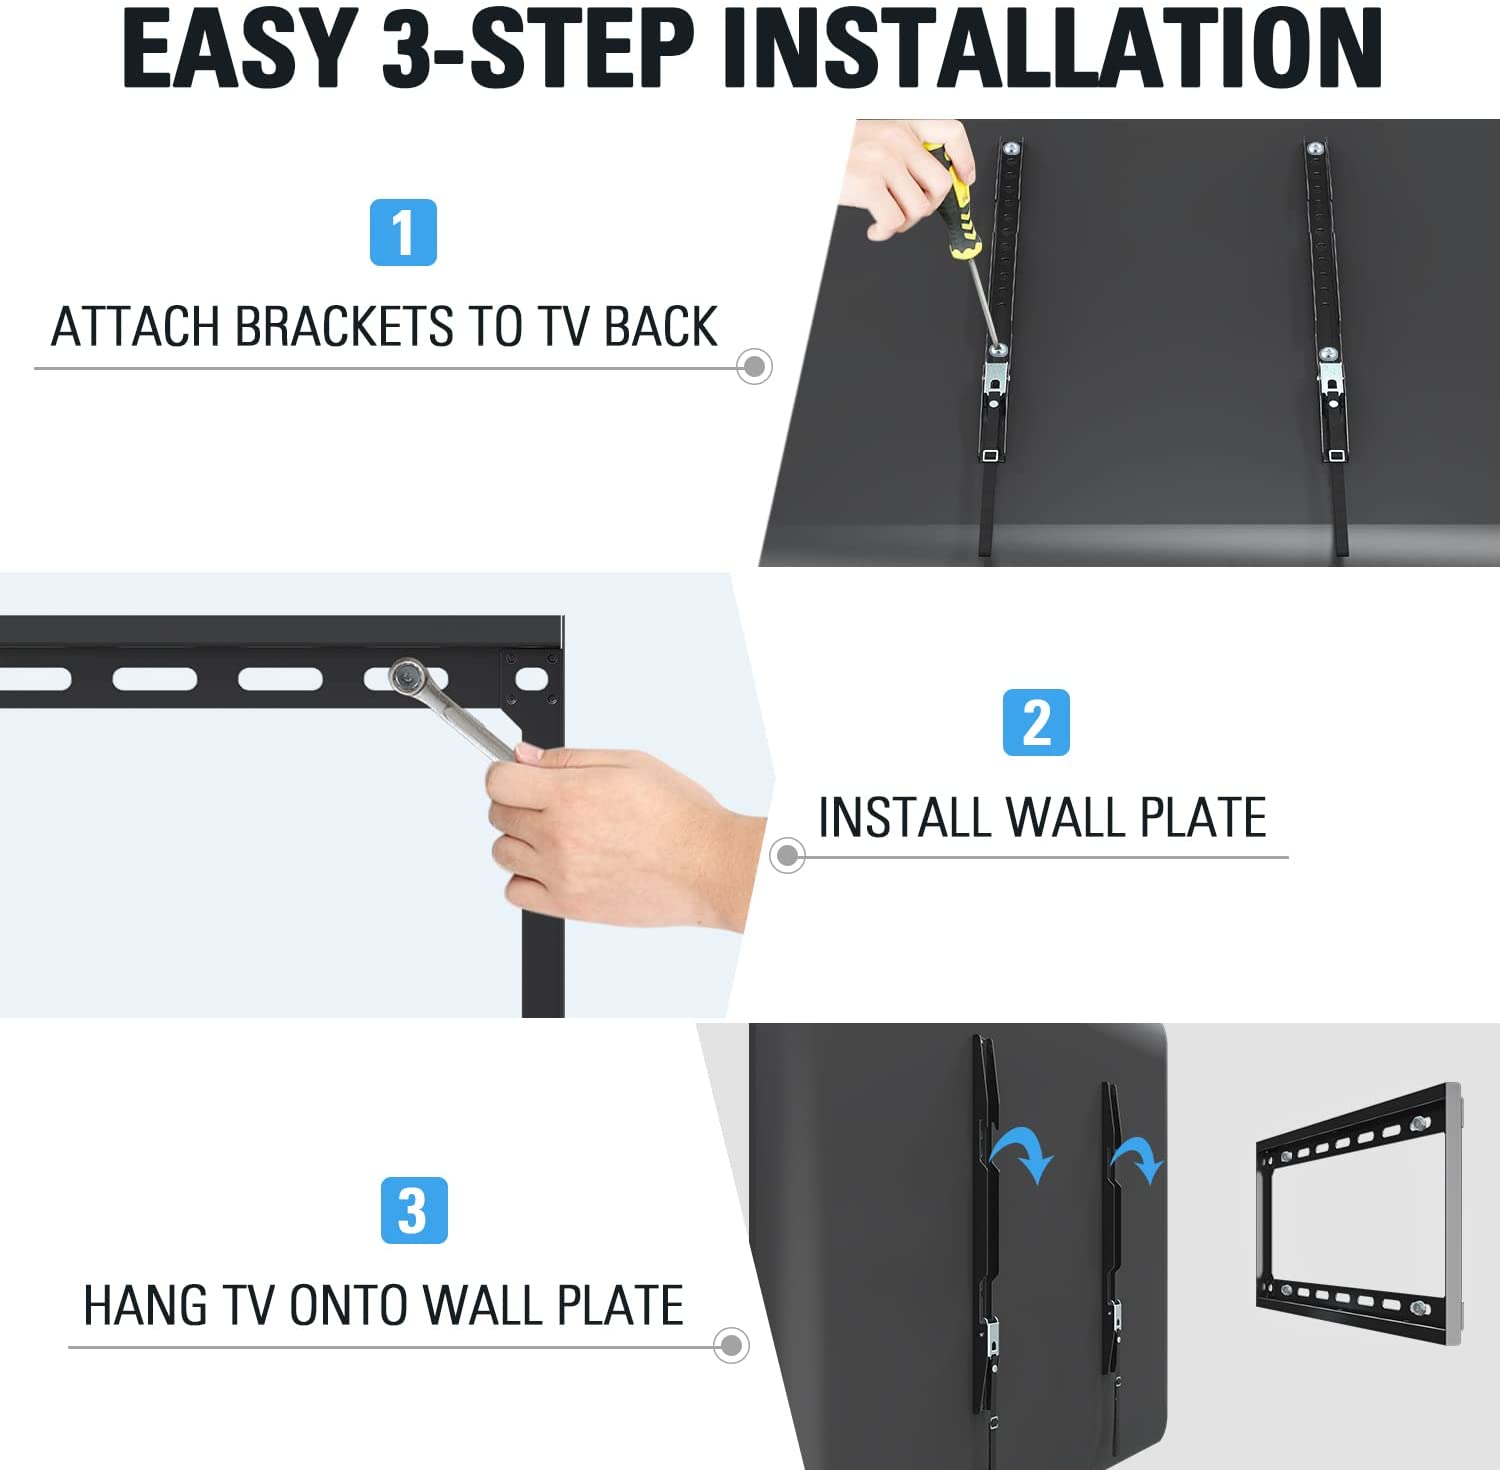 easy to hang a TV on the wall